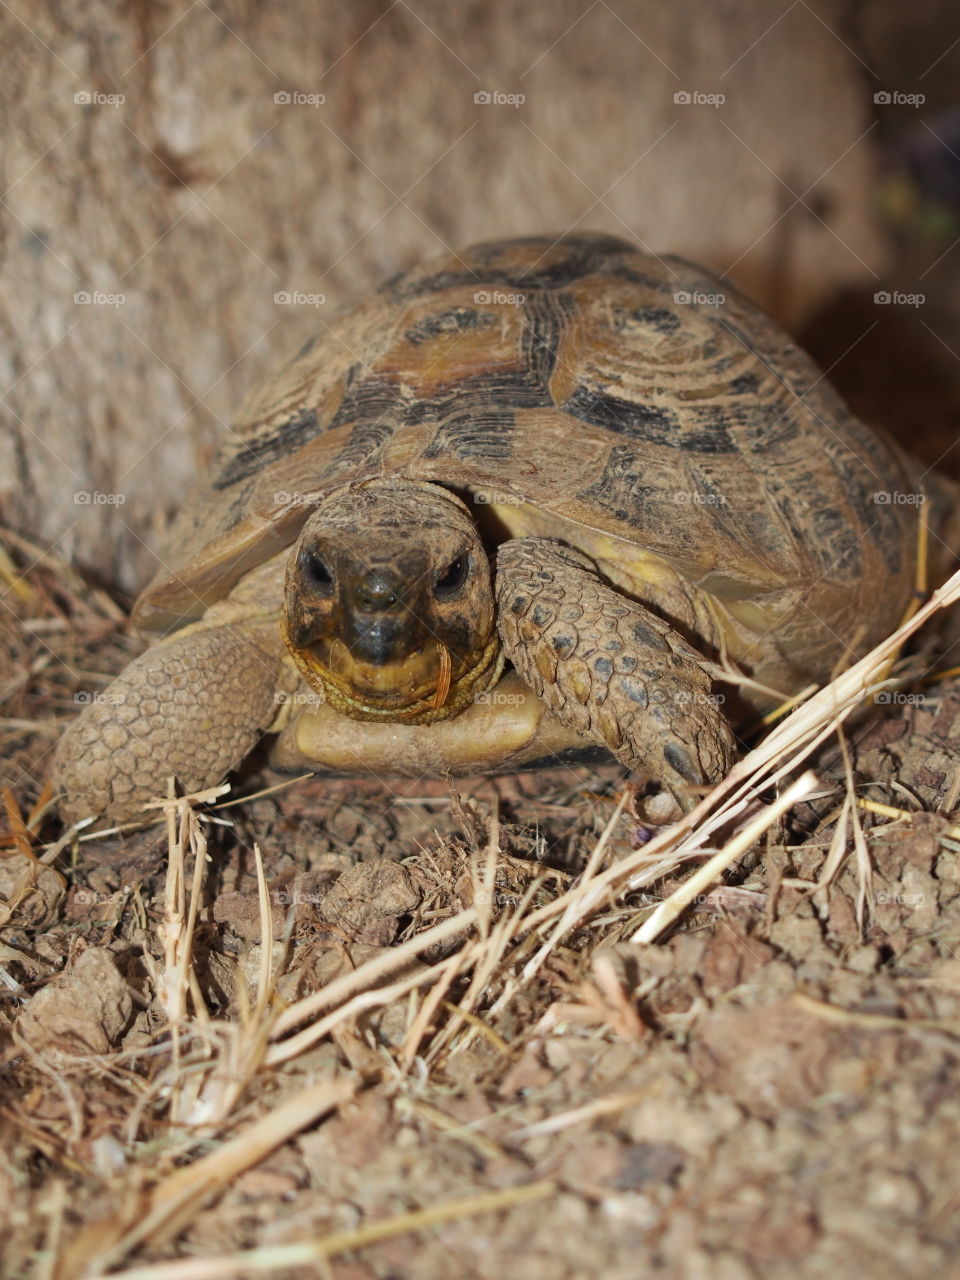 Turtle crawling on dirt